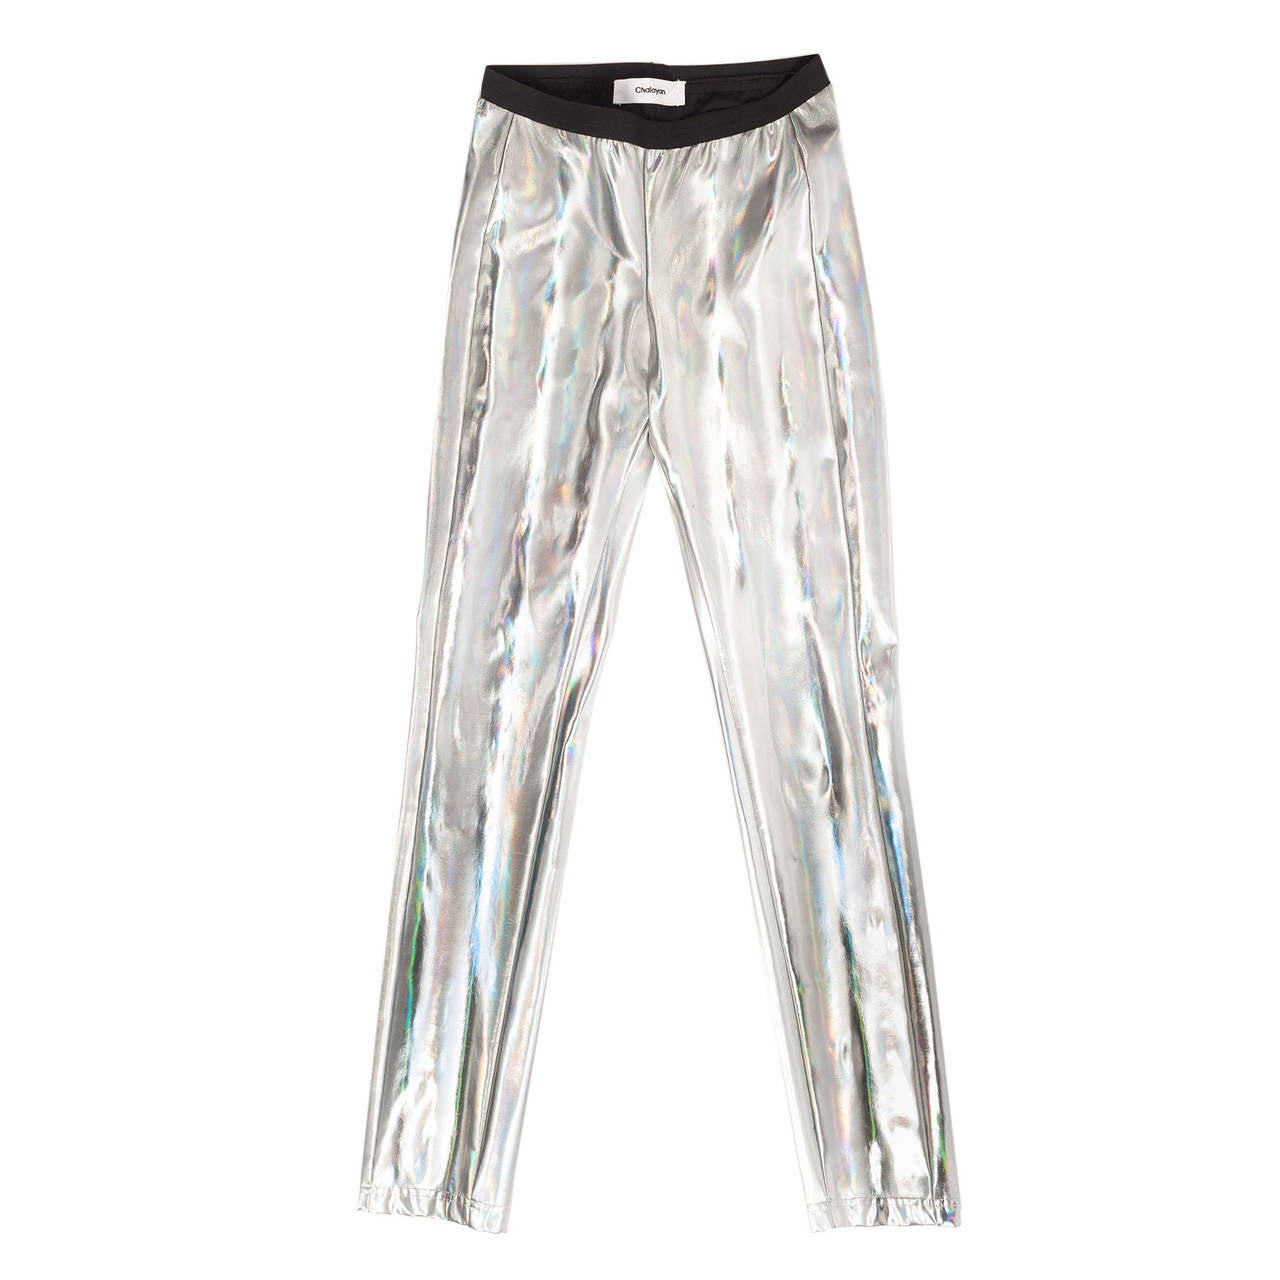 Hussein Chalayan Holographic leggings with a prism effect, Sz. 8 For Sale